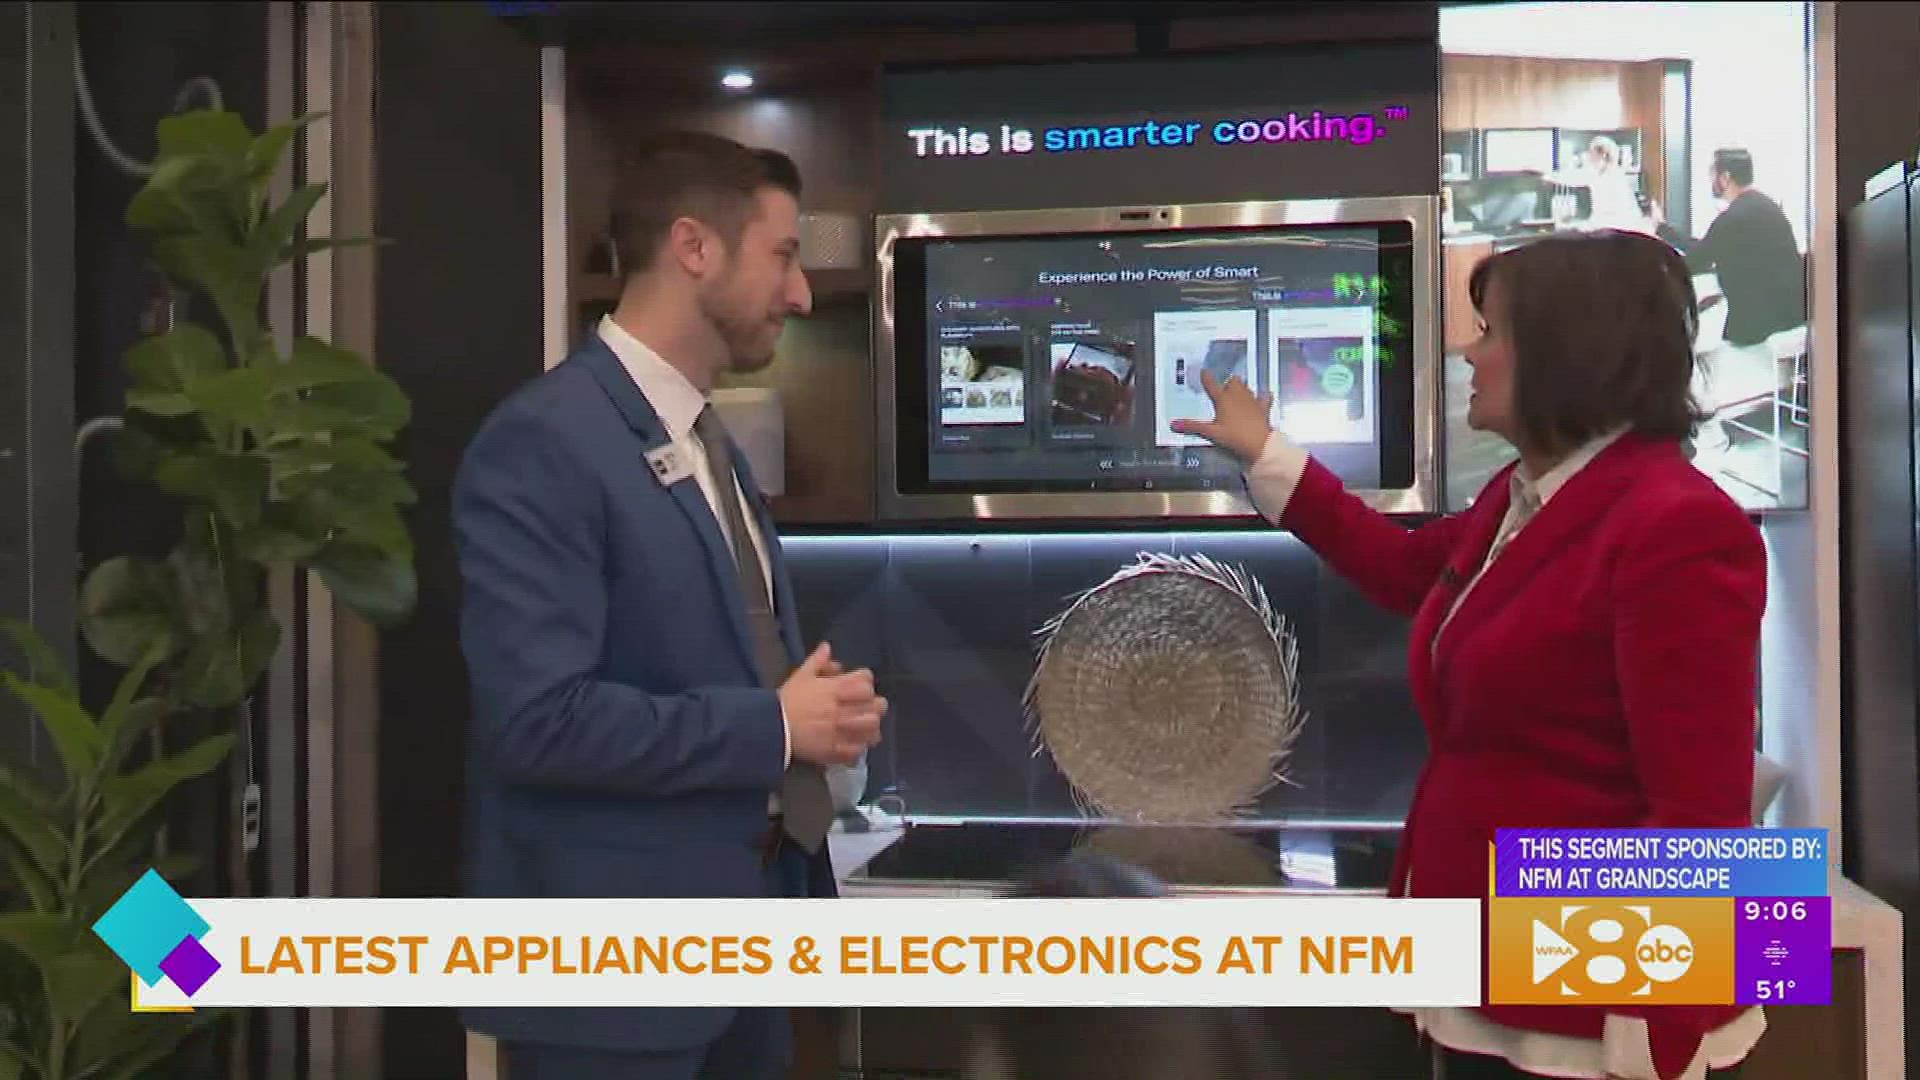 Paige checks out cool electronics & appliances at NFM. This segment is sponsored by NFM at Grandscape. Go to nfm.com for more information.